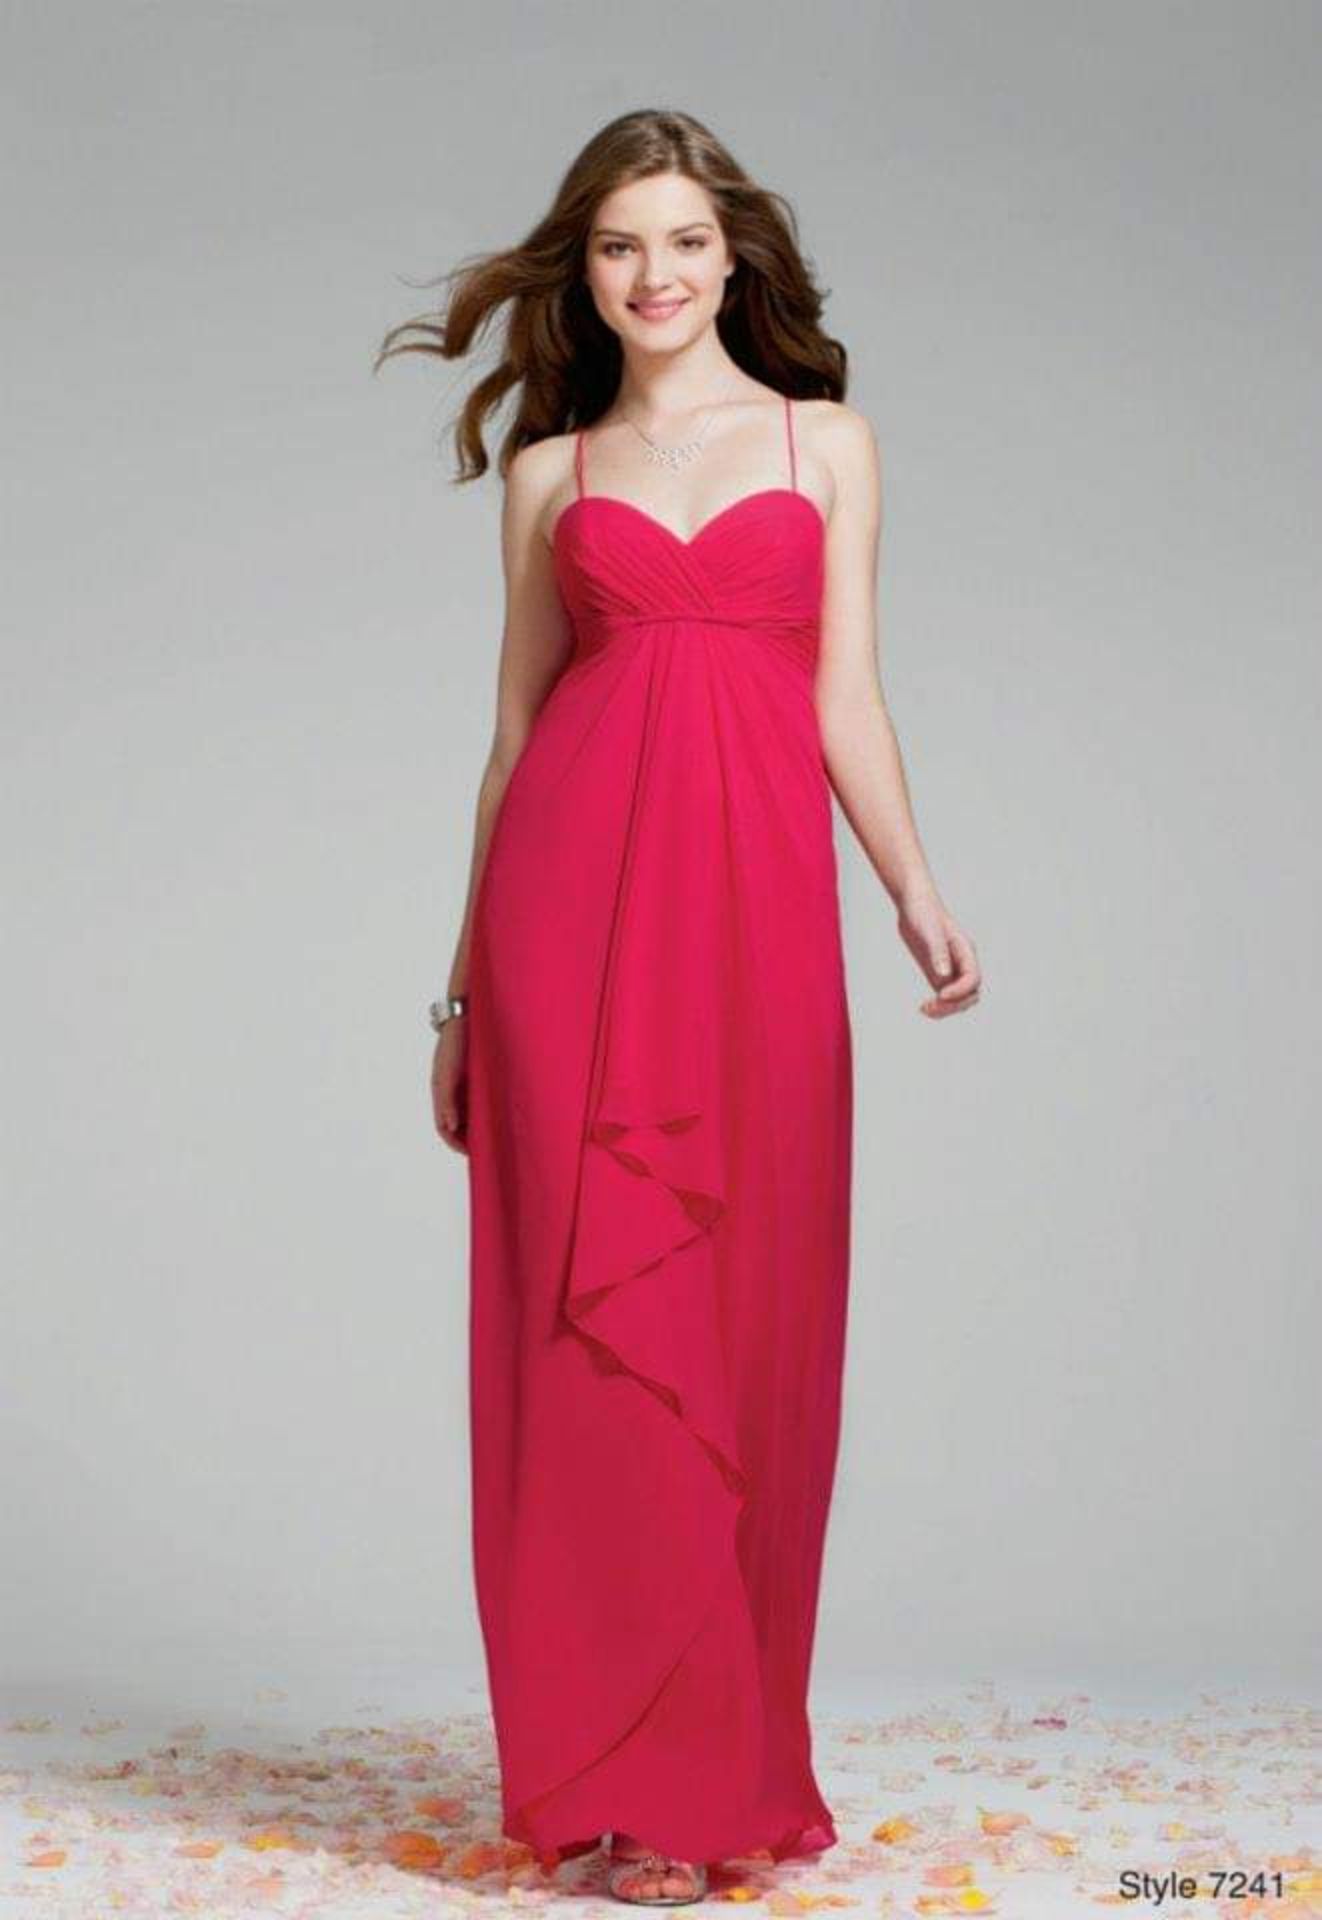 Bulk Lot of Dresses Mixed Sizes and Colours. All From Alfred Angelo x 50 Dresses - Image 8 of 9